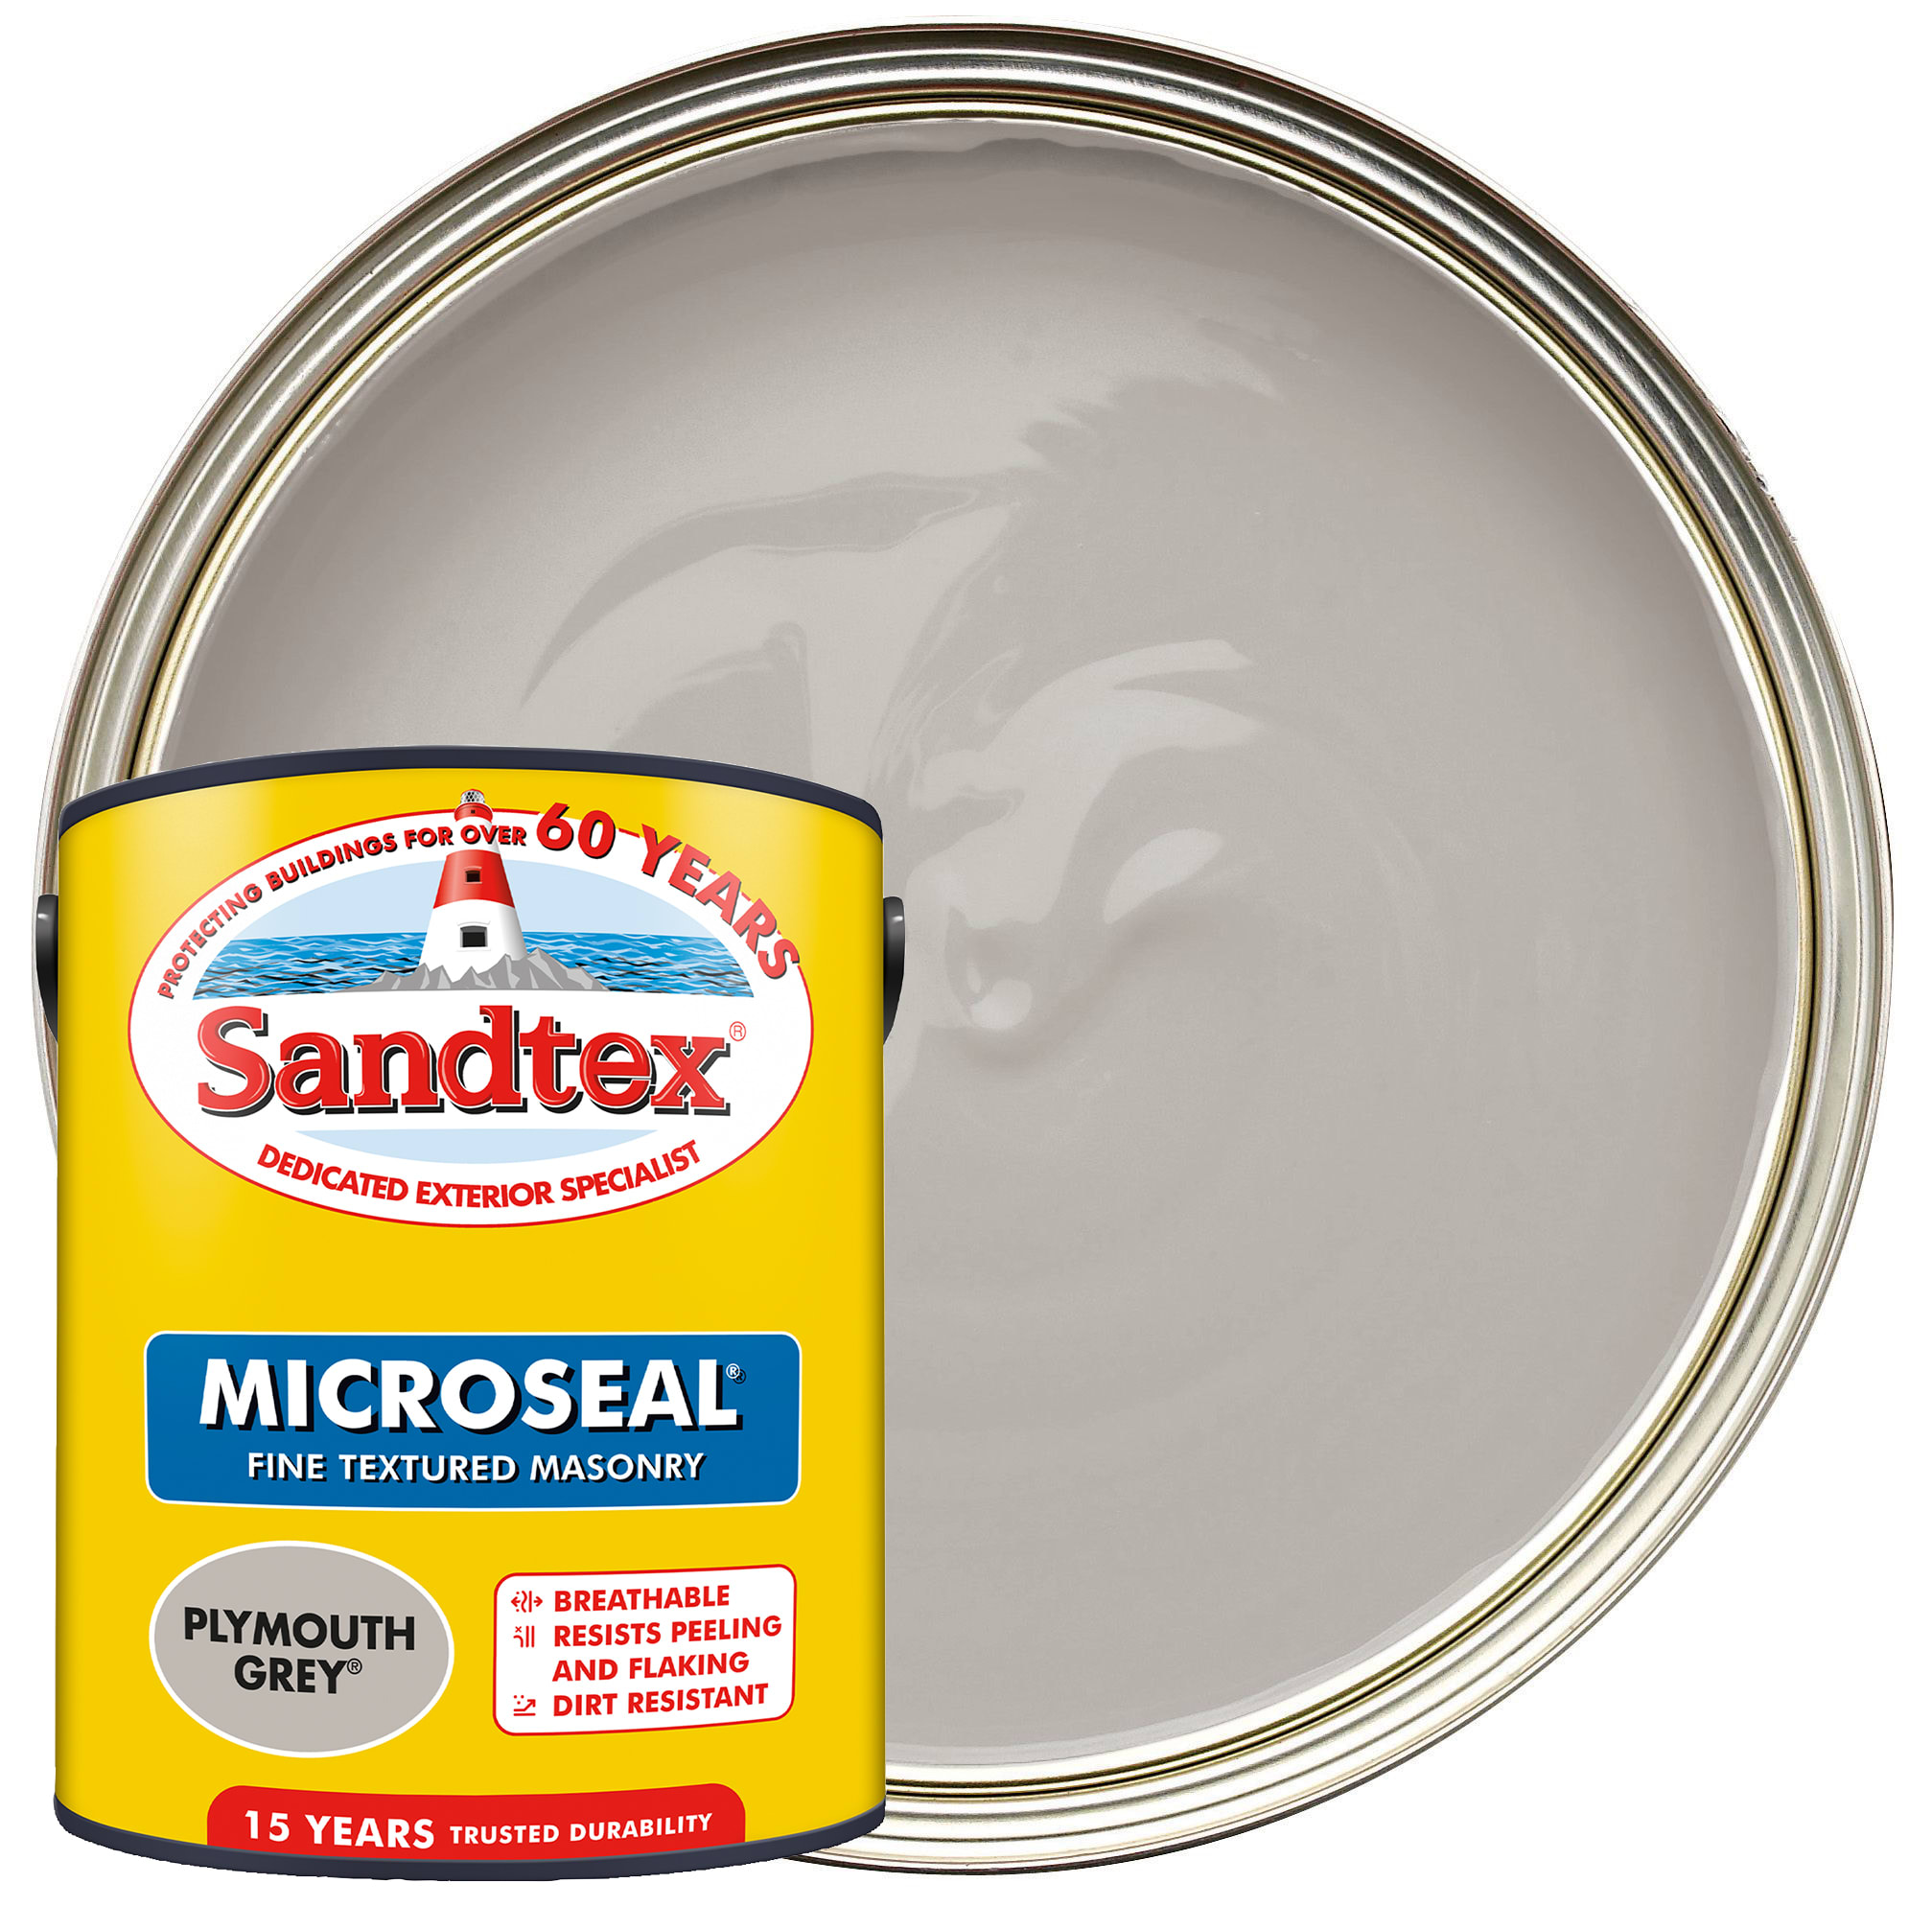 Image of Sandtex Microseal Fine Textured Weatherproof Masonry 15 Year Exterior Wall Paint - Plymouth Grey - 5L